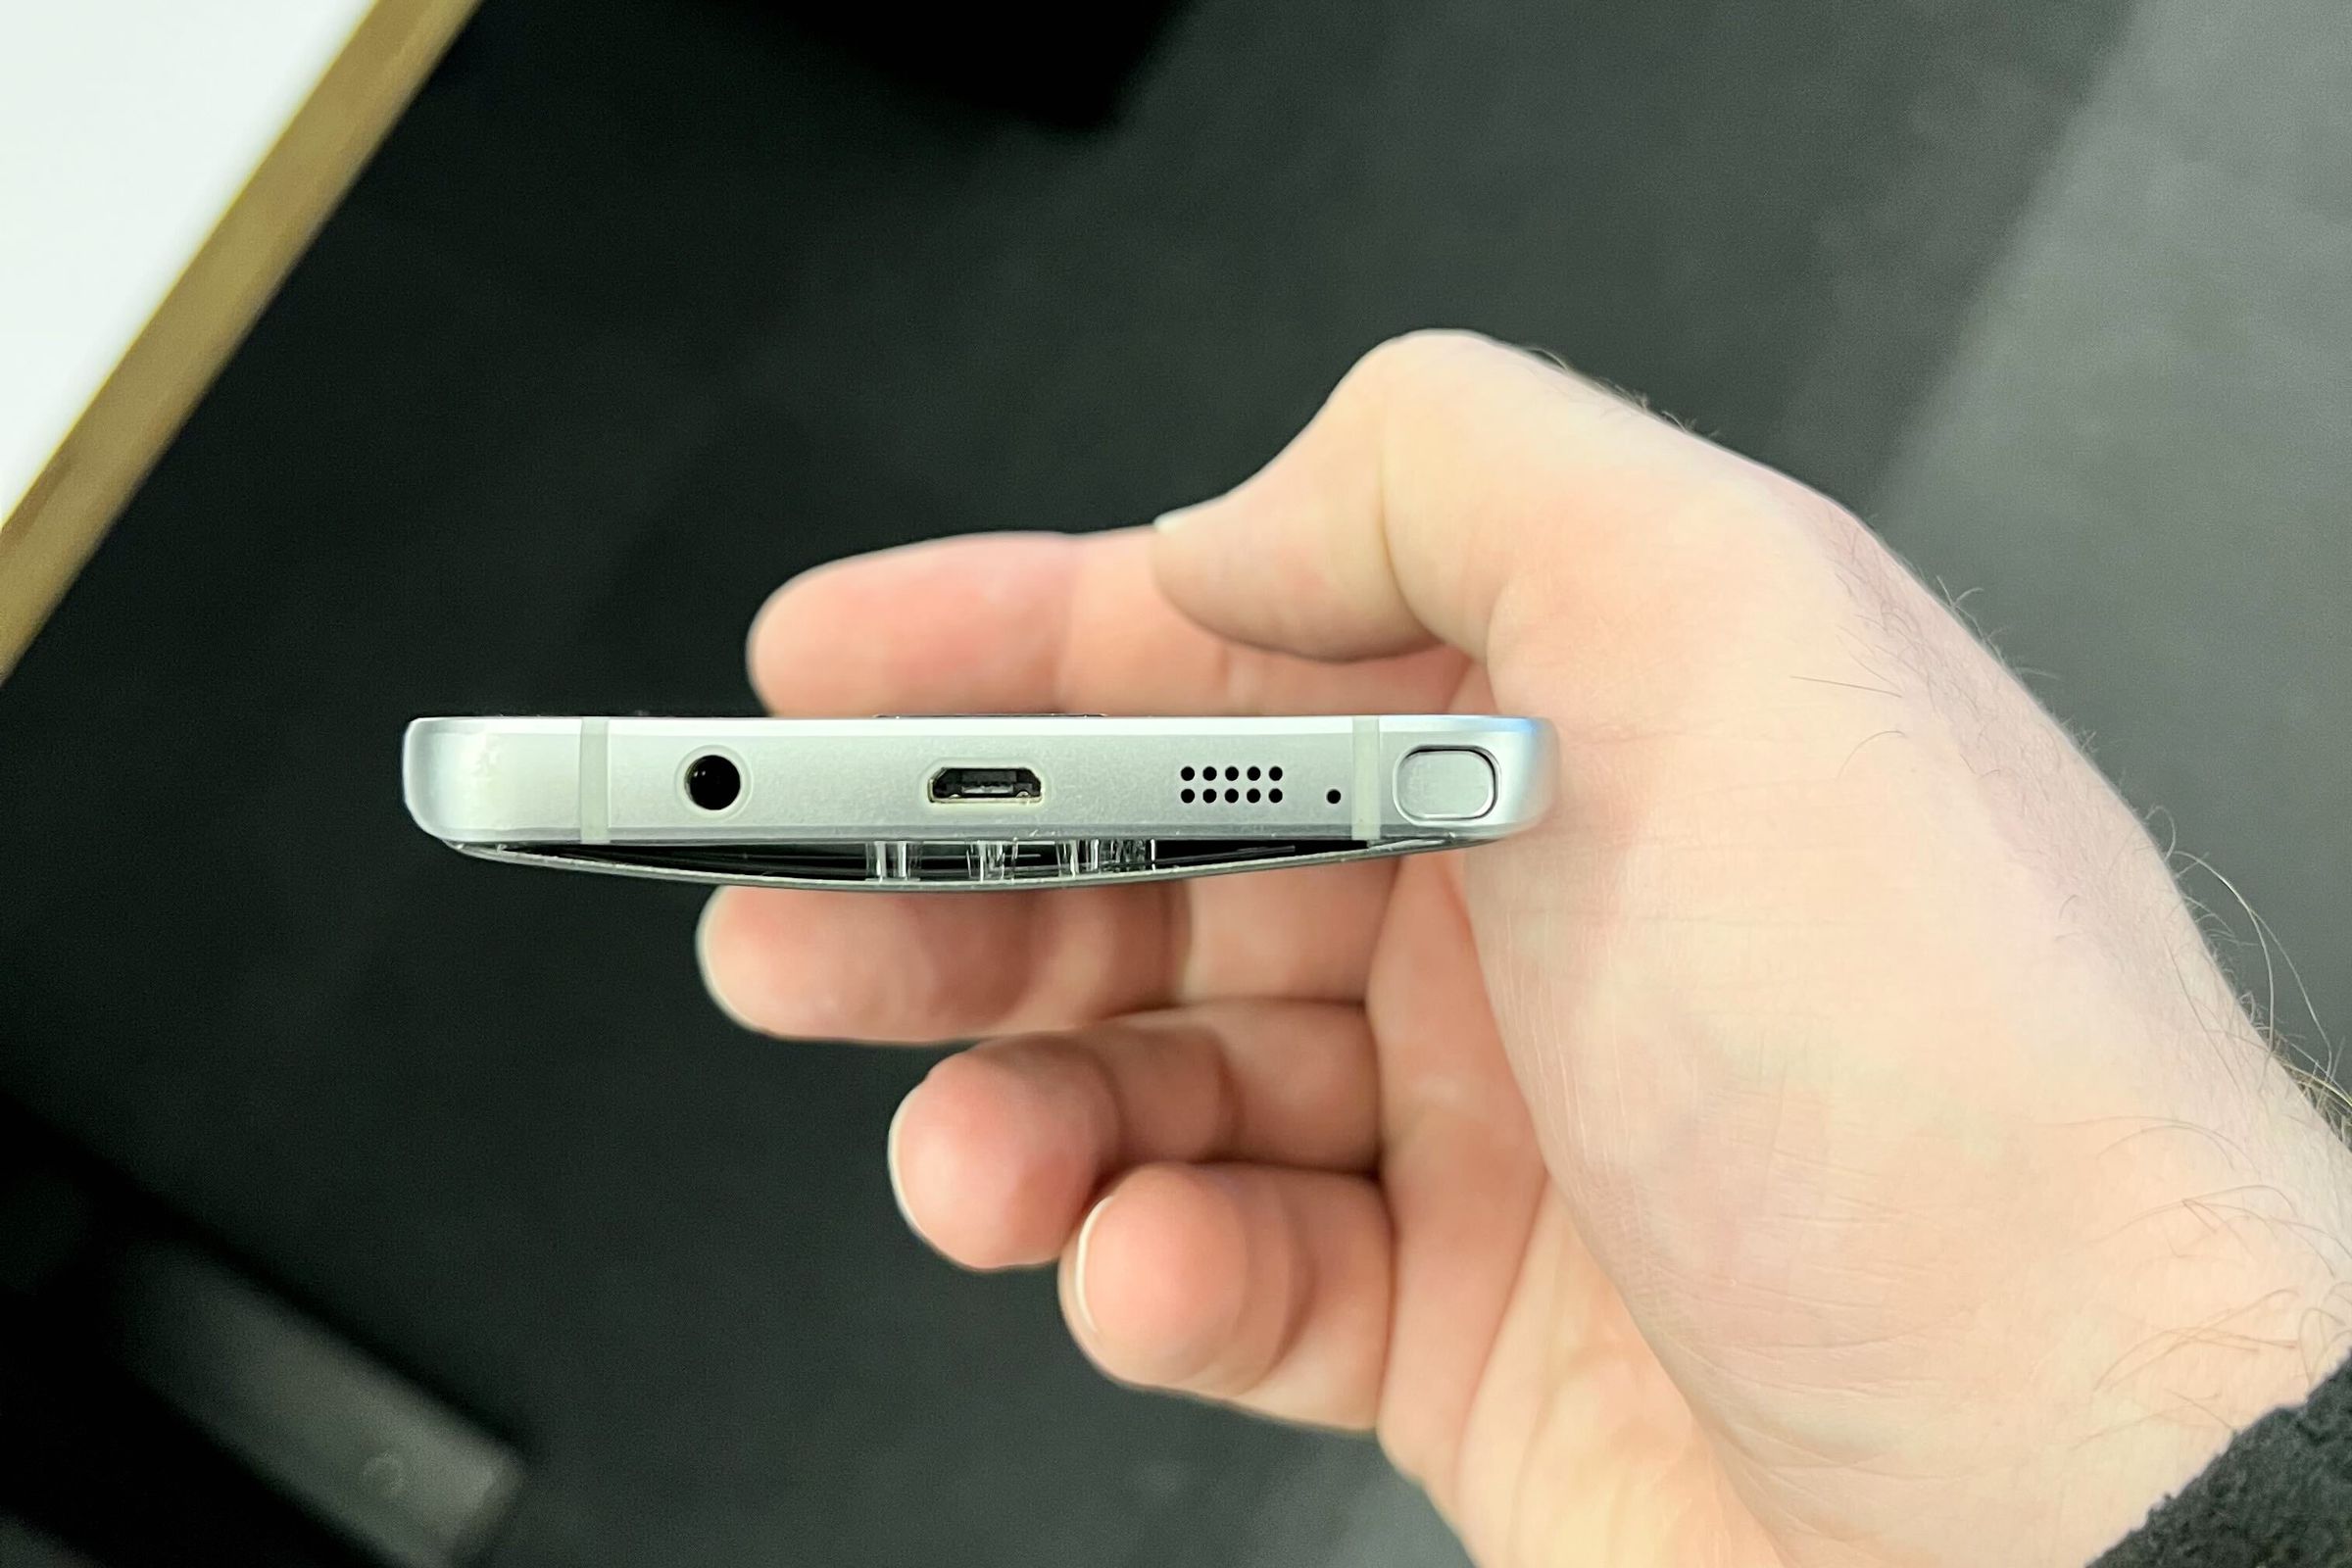 This Samsung Galaxy Note 5 from The Verge’s tech archives has a swollen battery and could definitely use some self-repair love.